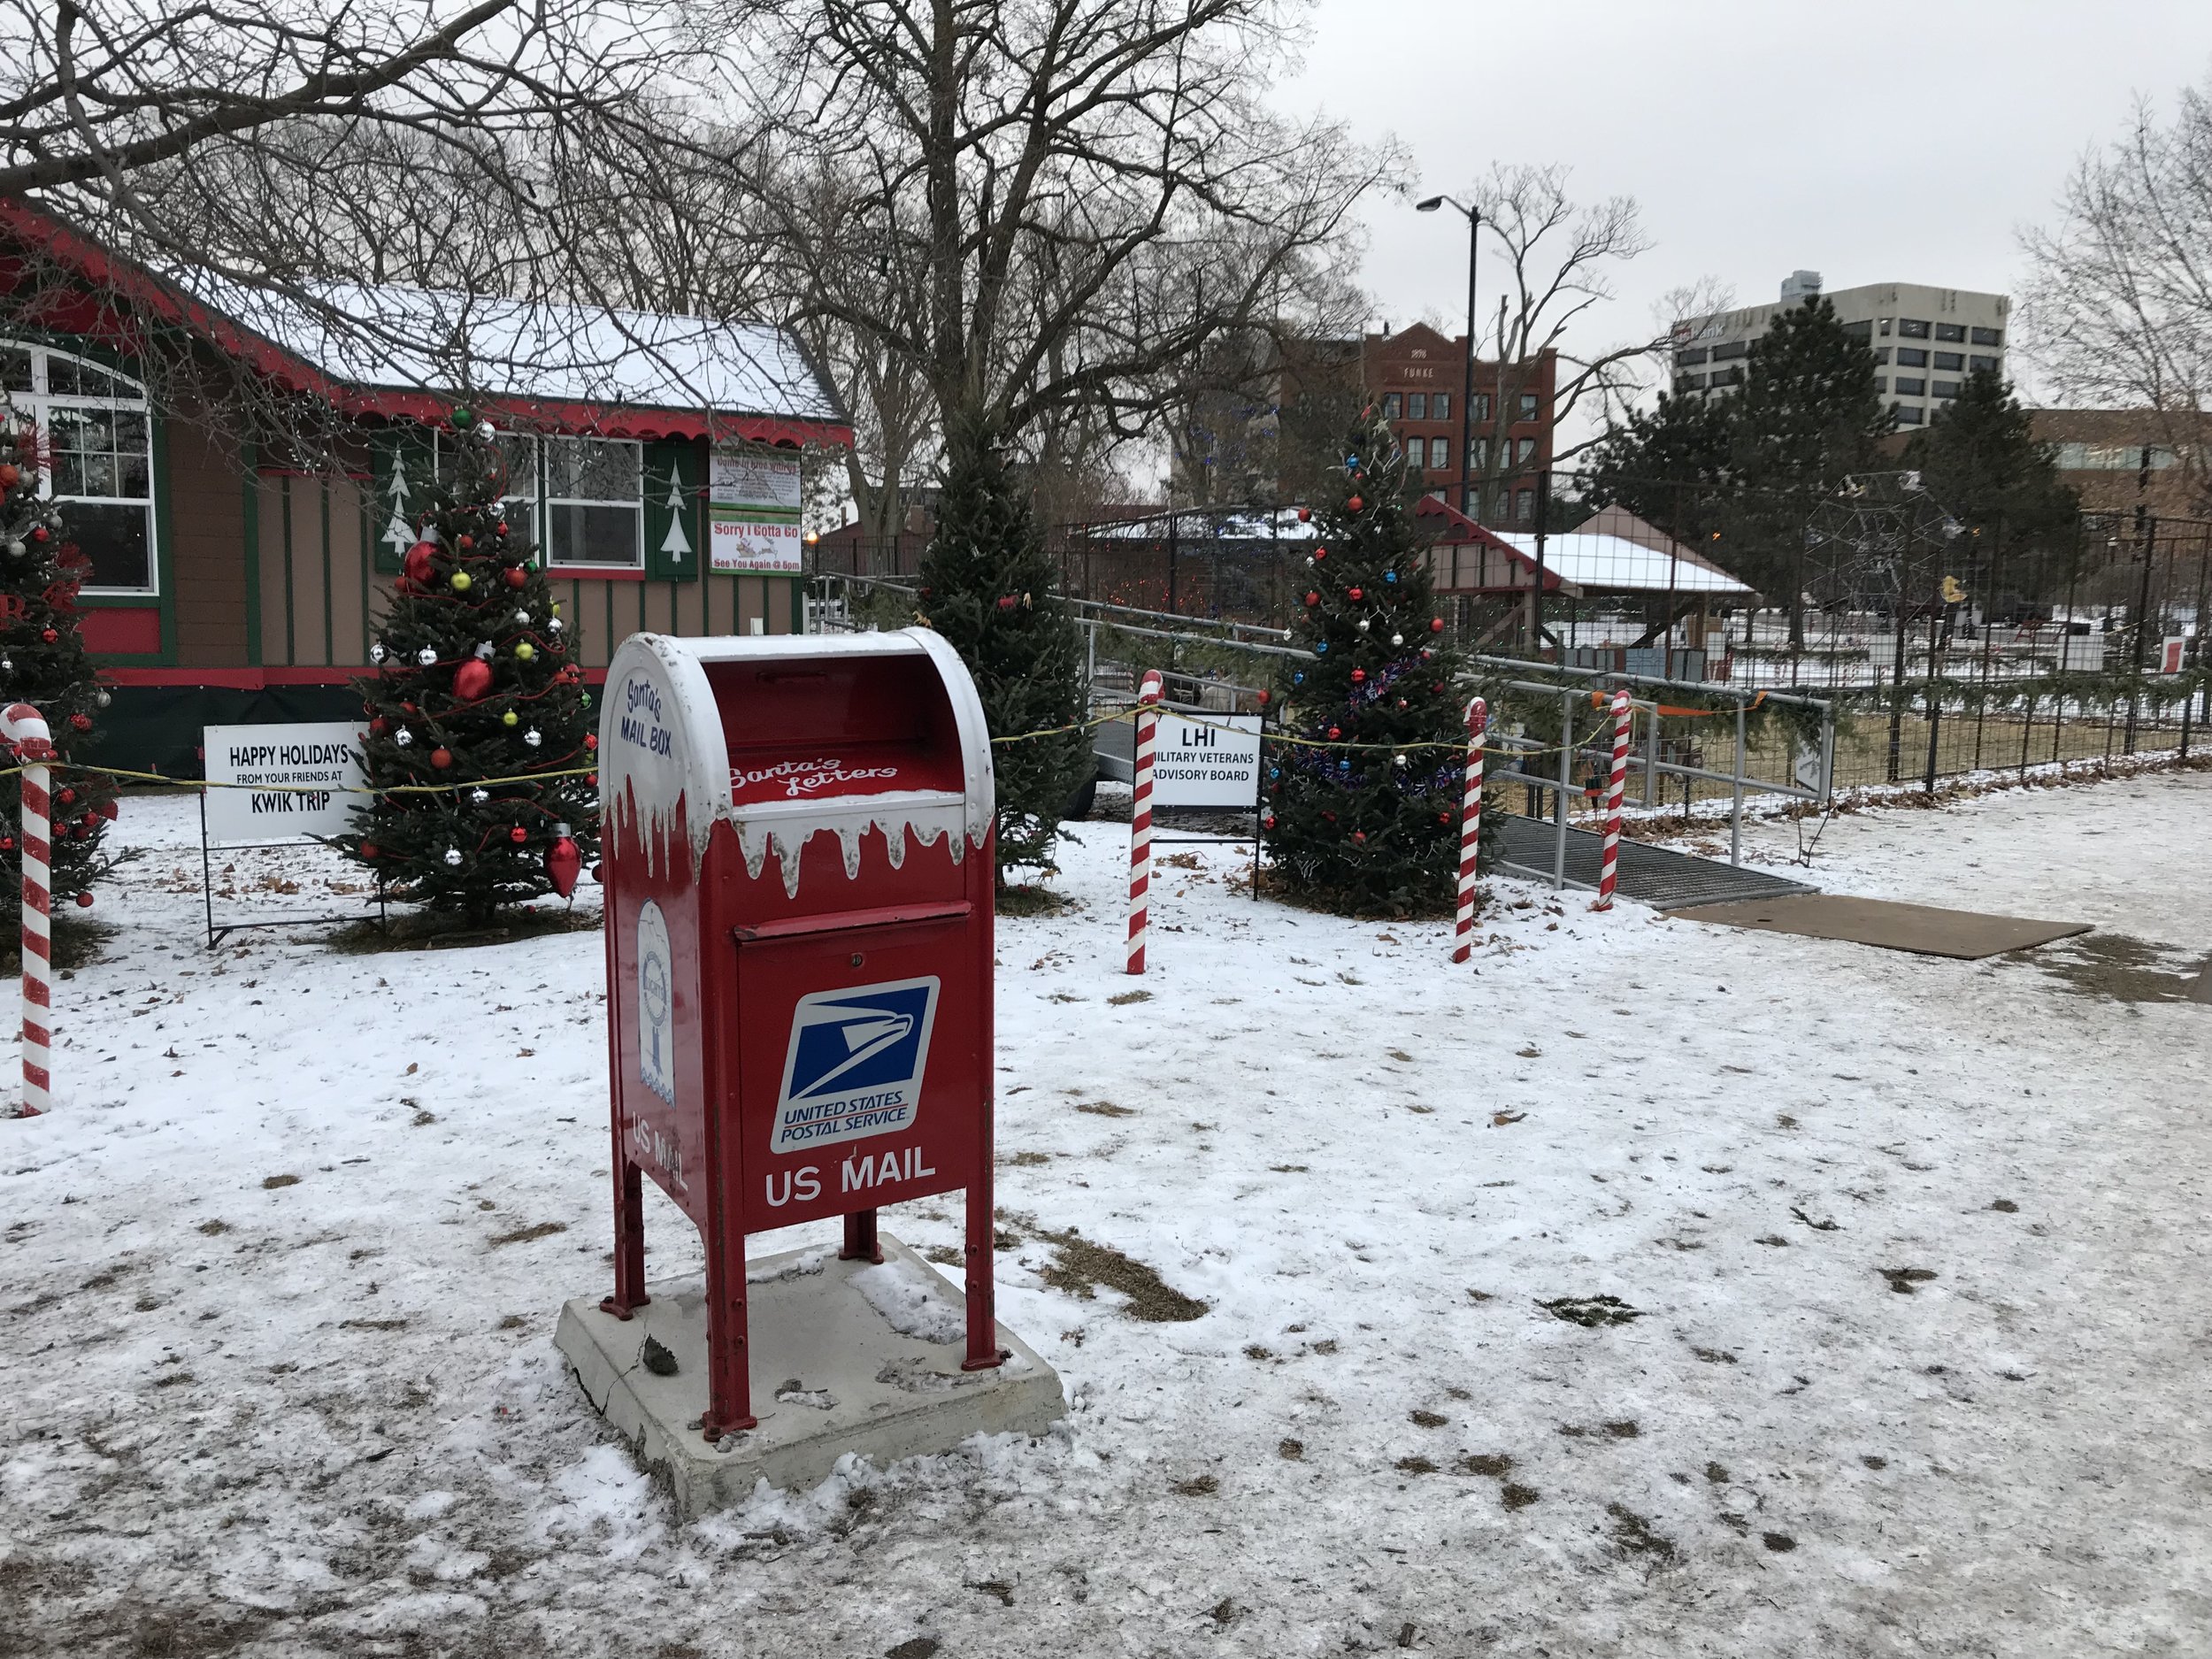 Holiday decorations in the park - La Crosse, WI - decorated US mailbox